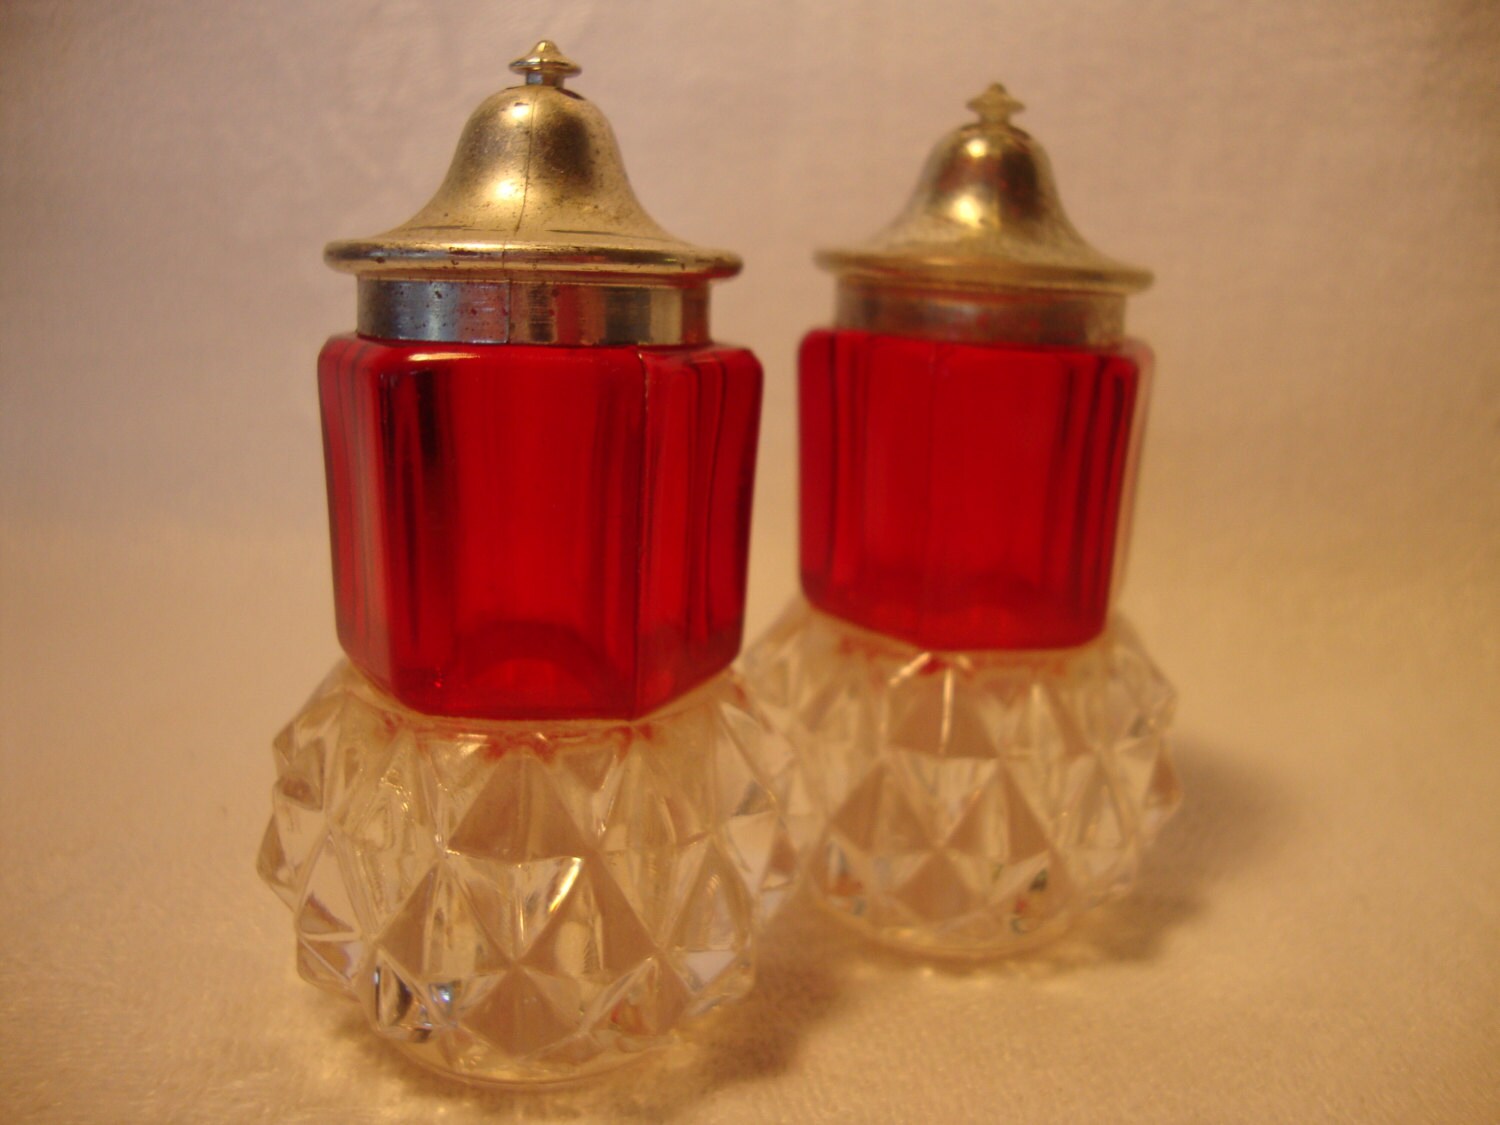 Salt and pepper shakers vintage red plastic diamond point